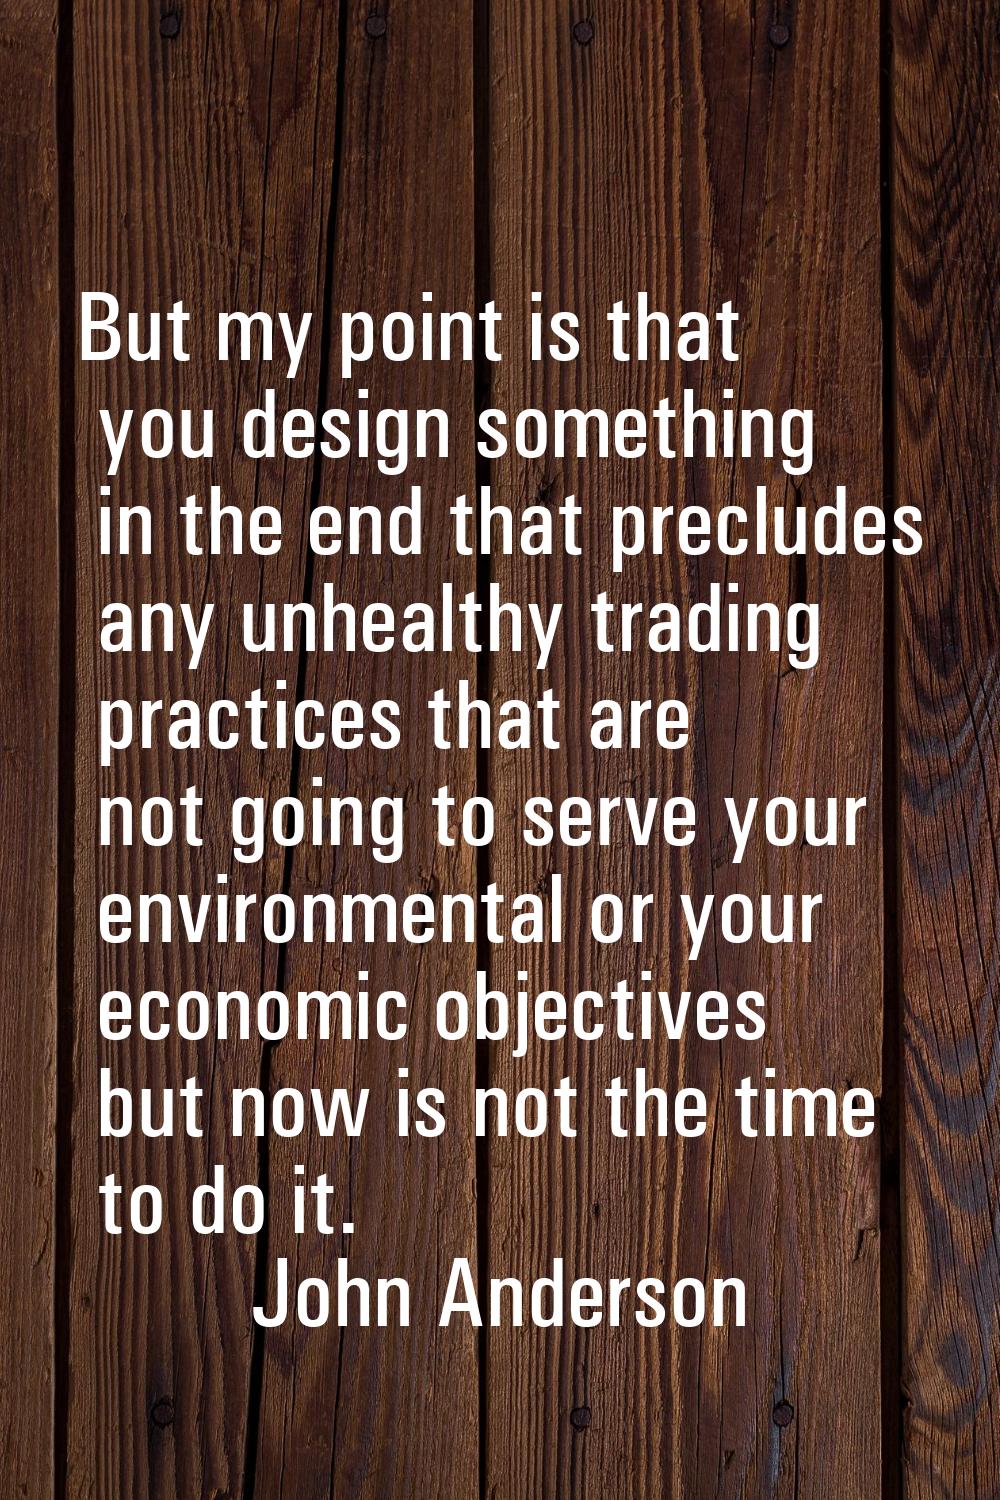 But my point is that you design something in the end that precludes any unhealthy trading practices